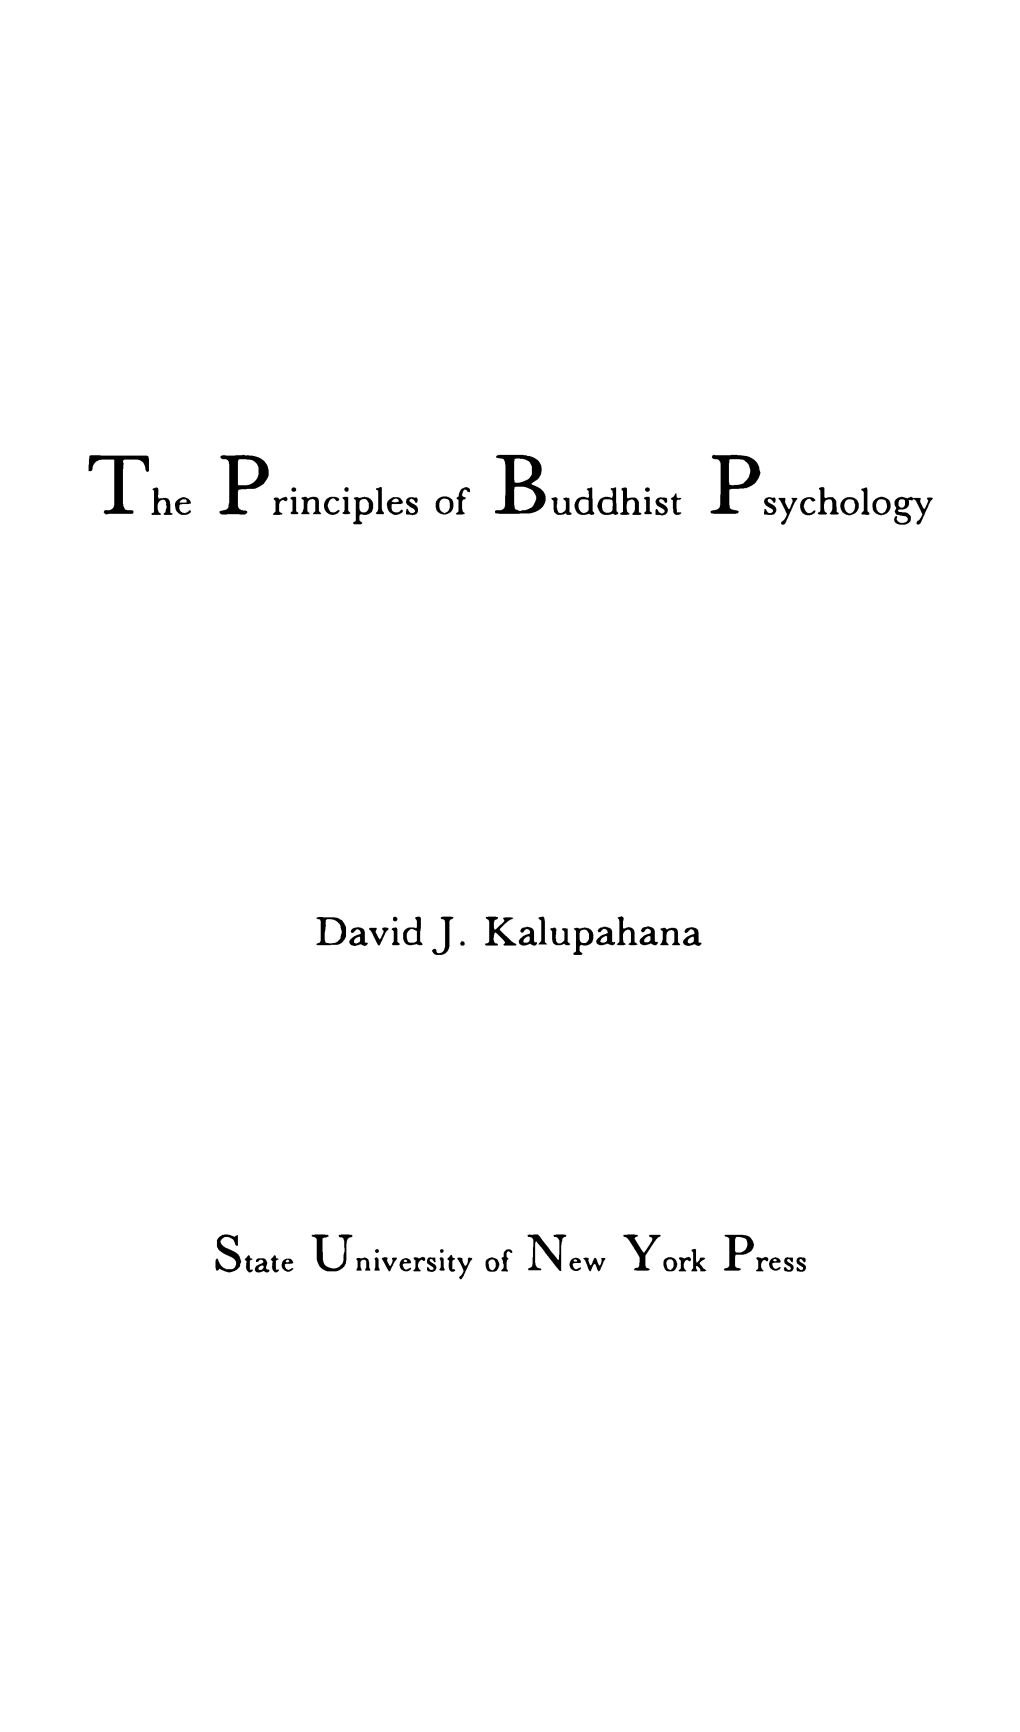 From the Principles of Buddhist Psychology